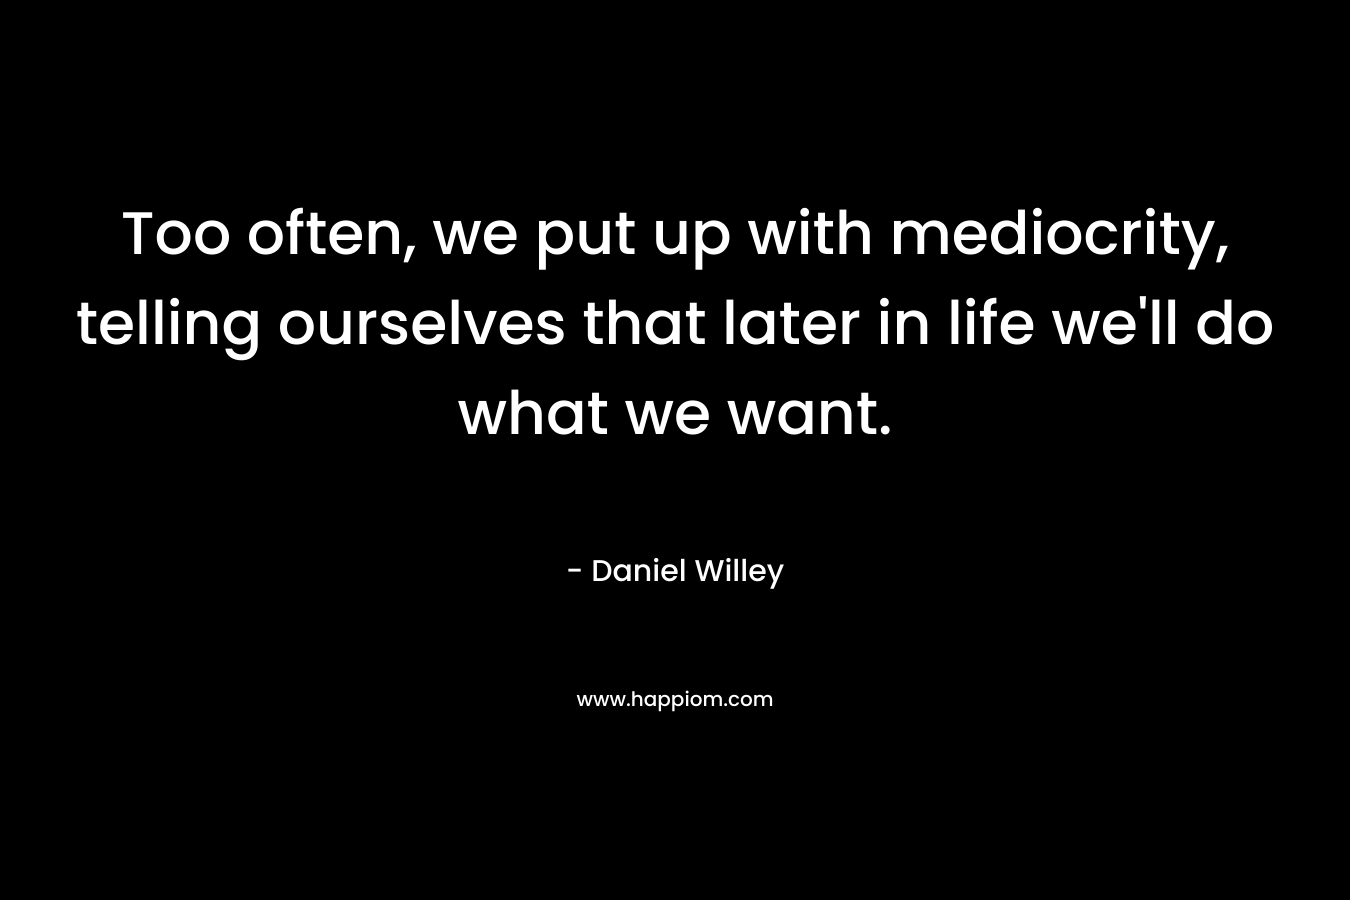 Too often, we put up with mediocrity, telling ourselves that later in life we'll do what we want.